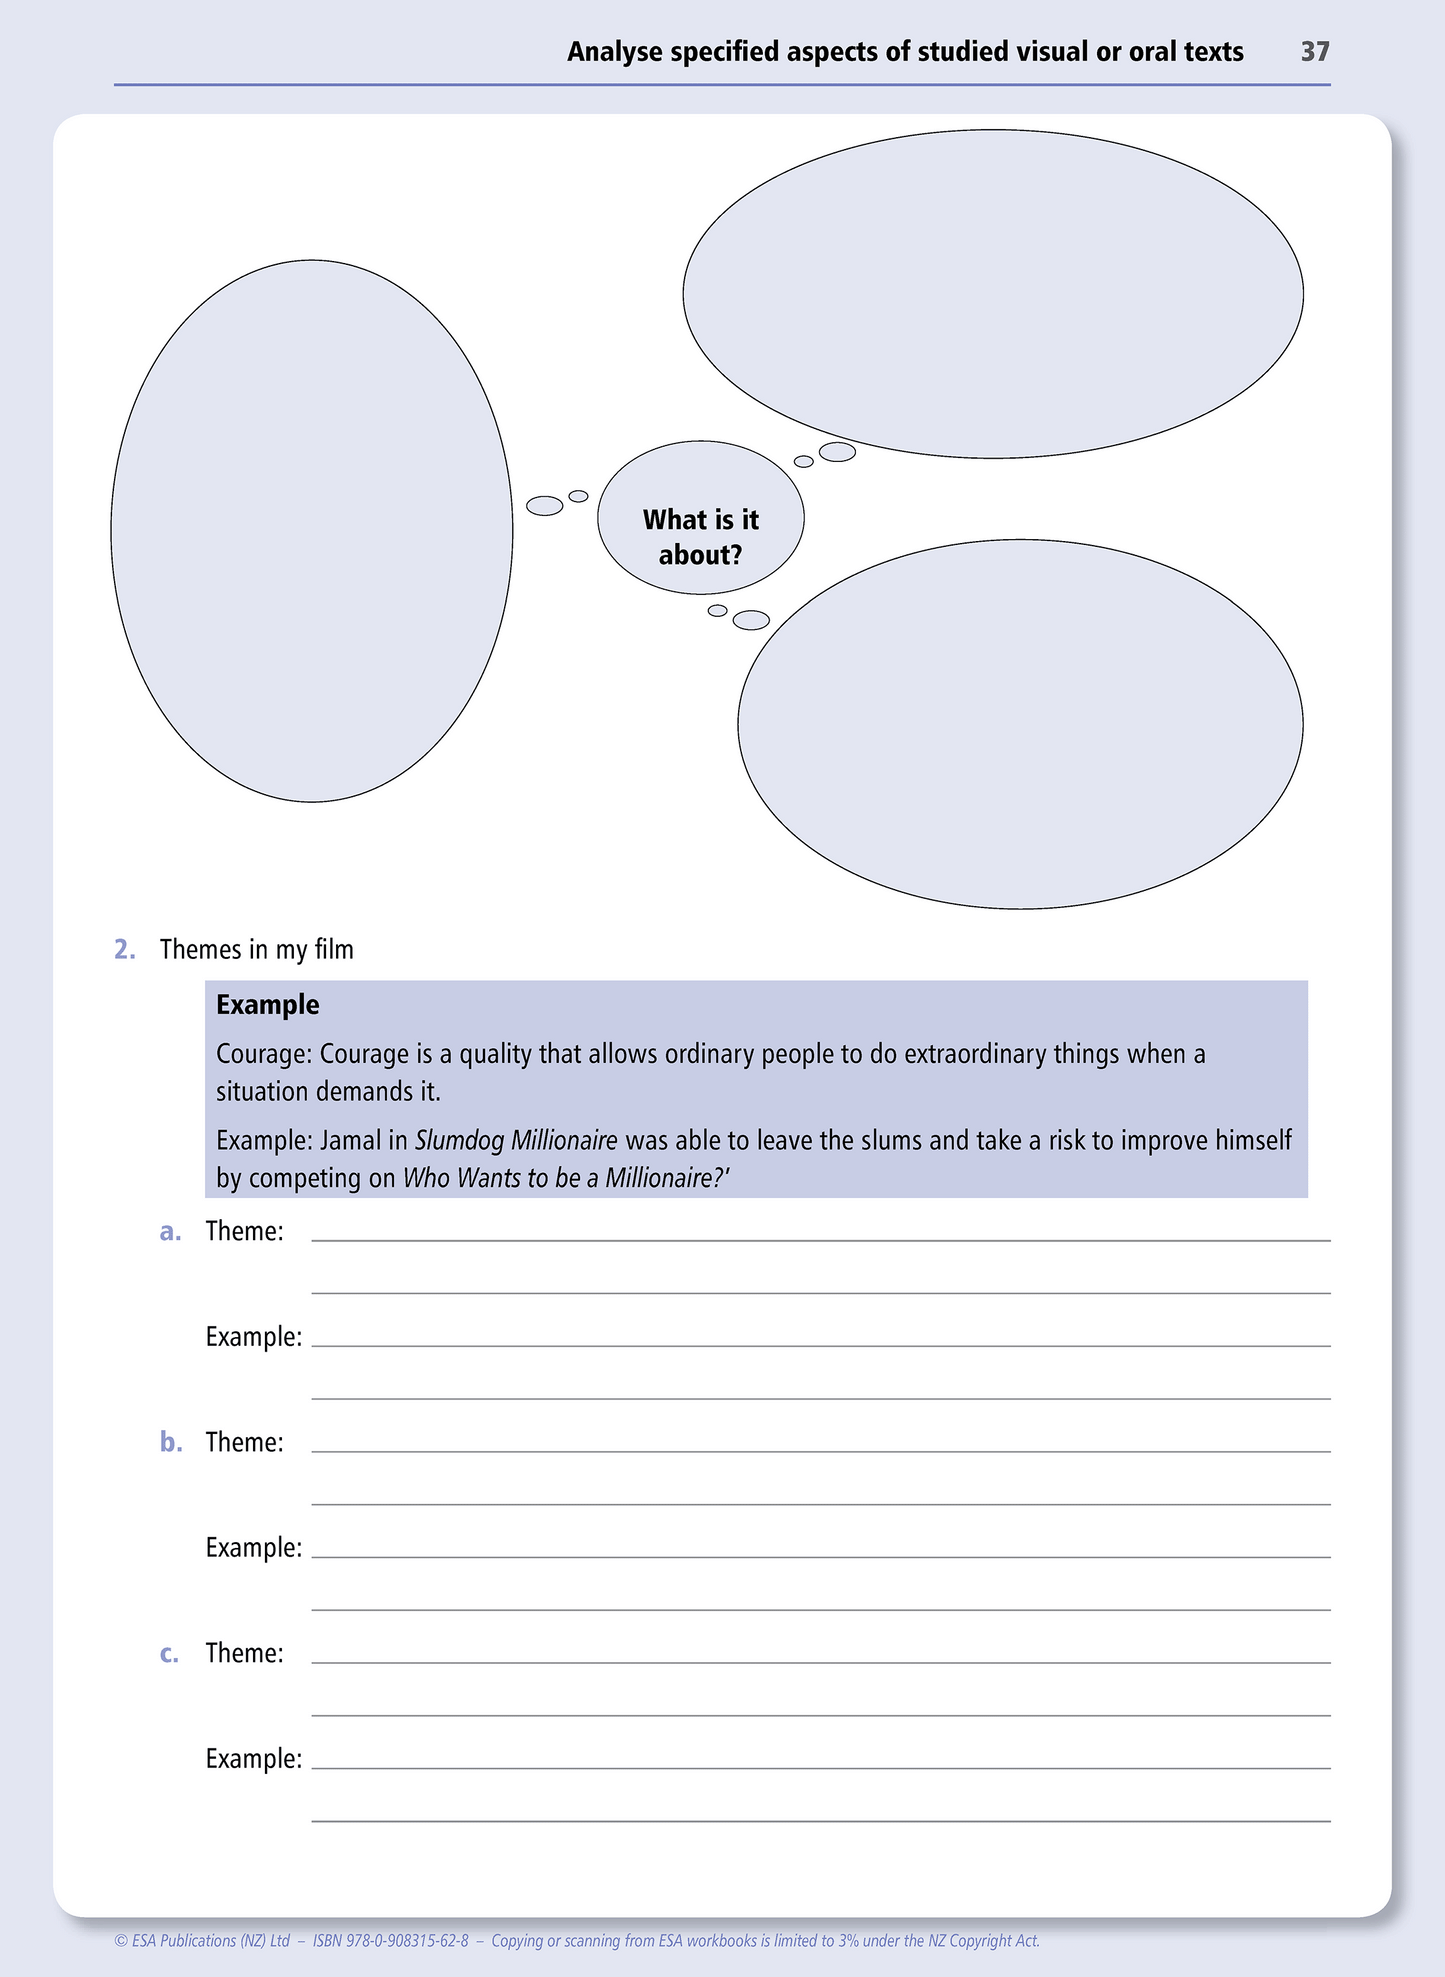 Level 2 Visual Texts 2.2 Learning Workbook